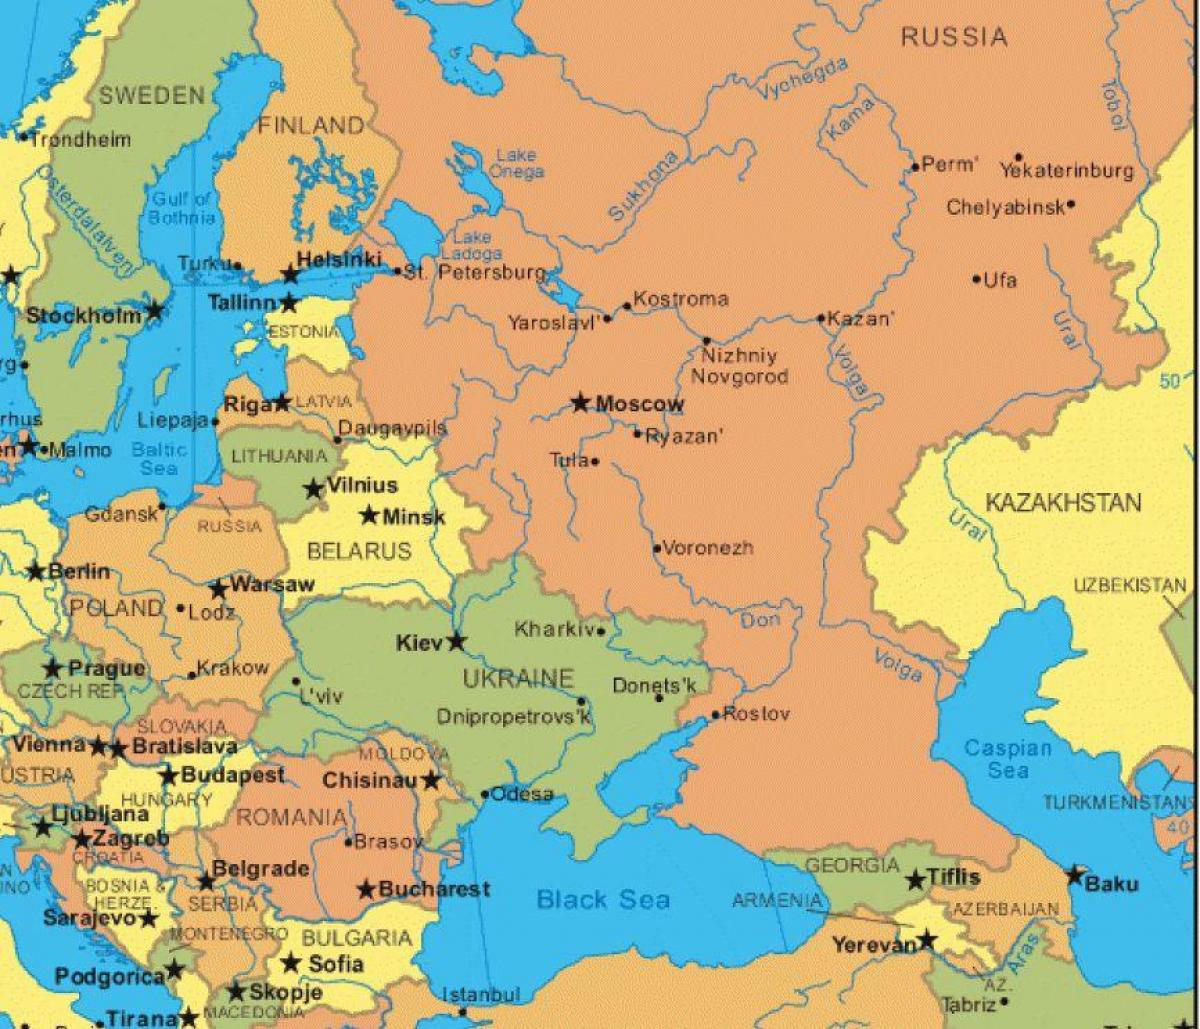 eastern europe and Russia map